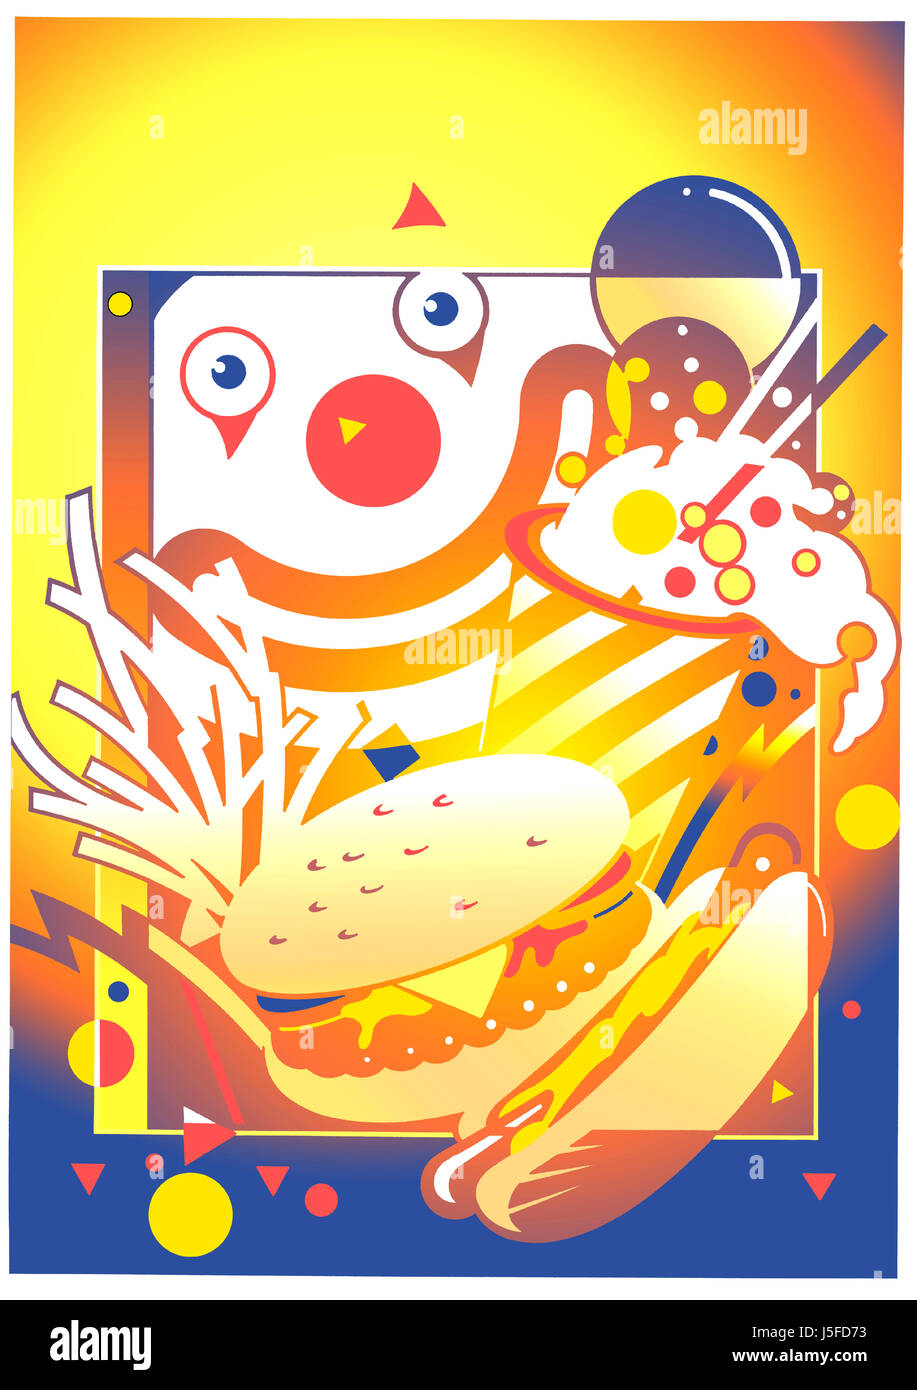 Clown face behind take out food Stock Photo